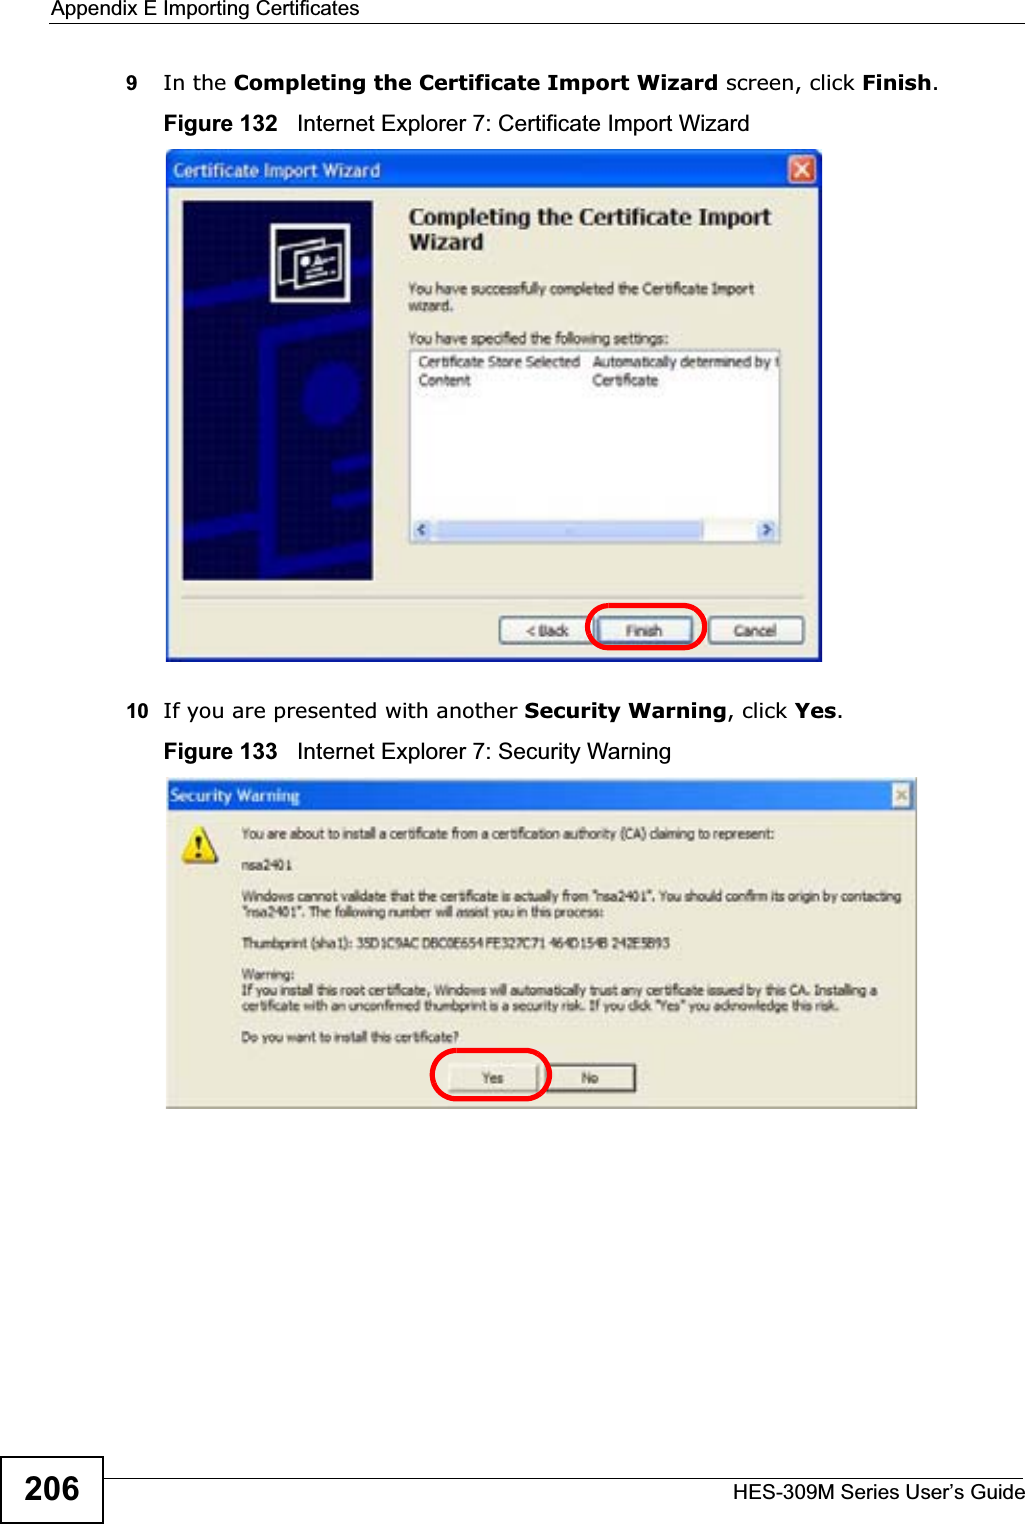 Appendix E Importing CertificatesHES-309M Series User’s Guide2069In the Completing the Certificate Import Wizard screen, click Finish.Figure 132   Internet Explorer 7: Certificate Import Wizard10 If you are presented with another Security Warning, click Yes.Figure 133   Internet Explorer 7: Security Warning